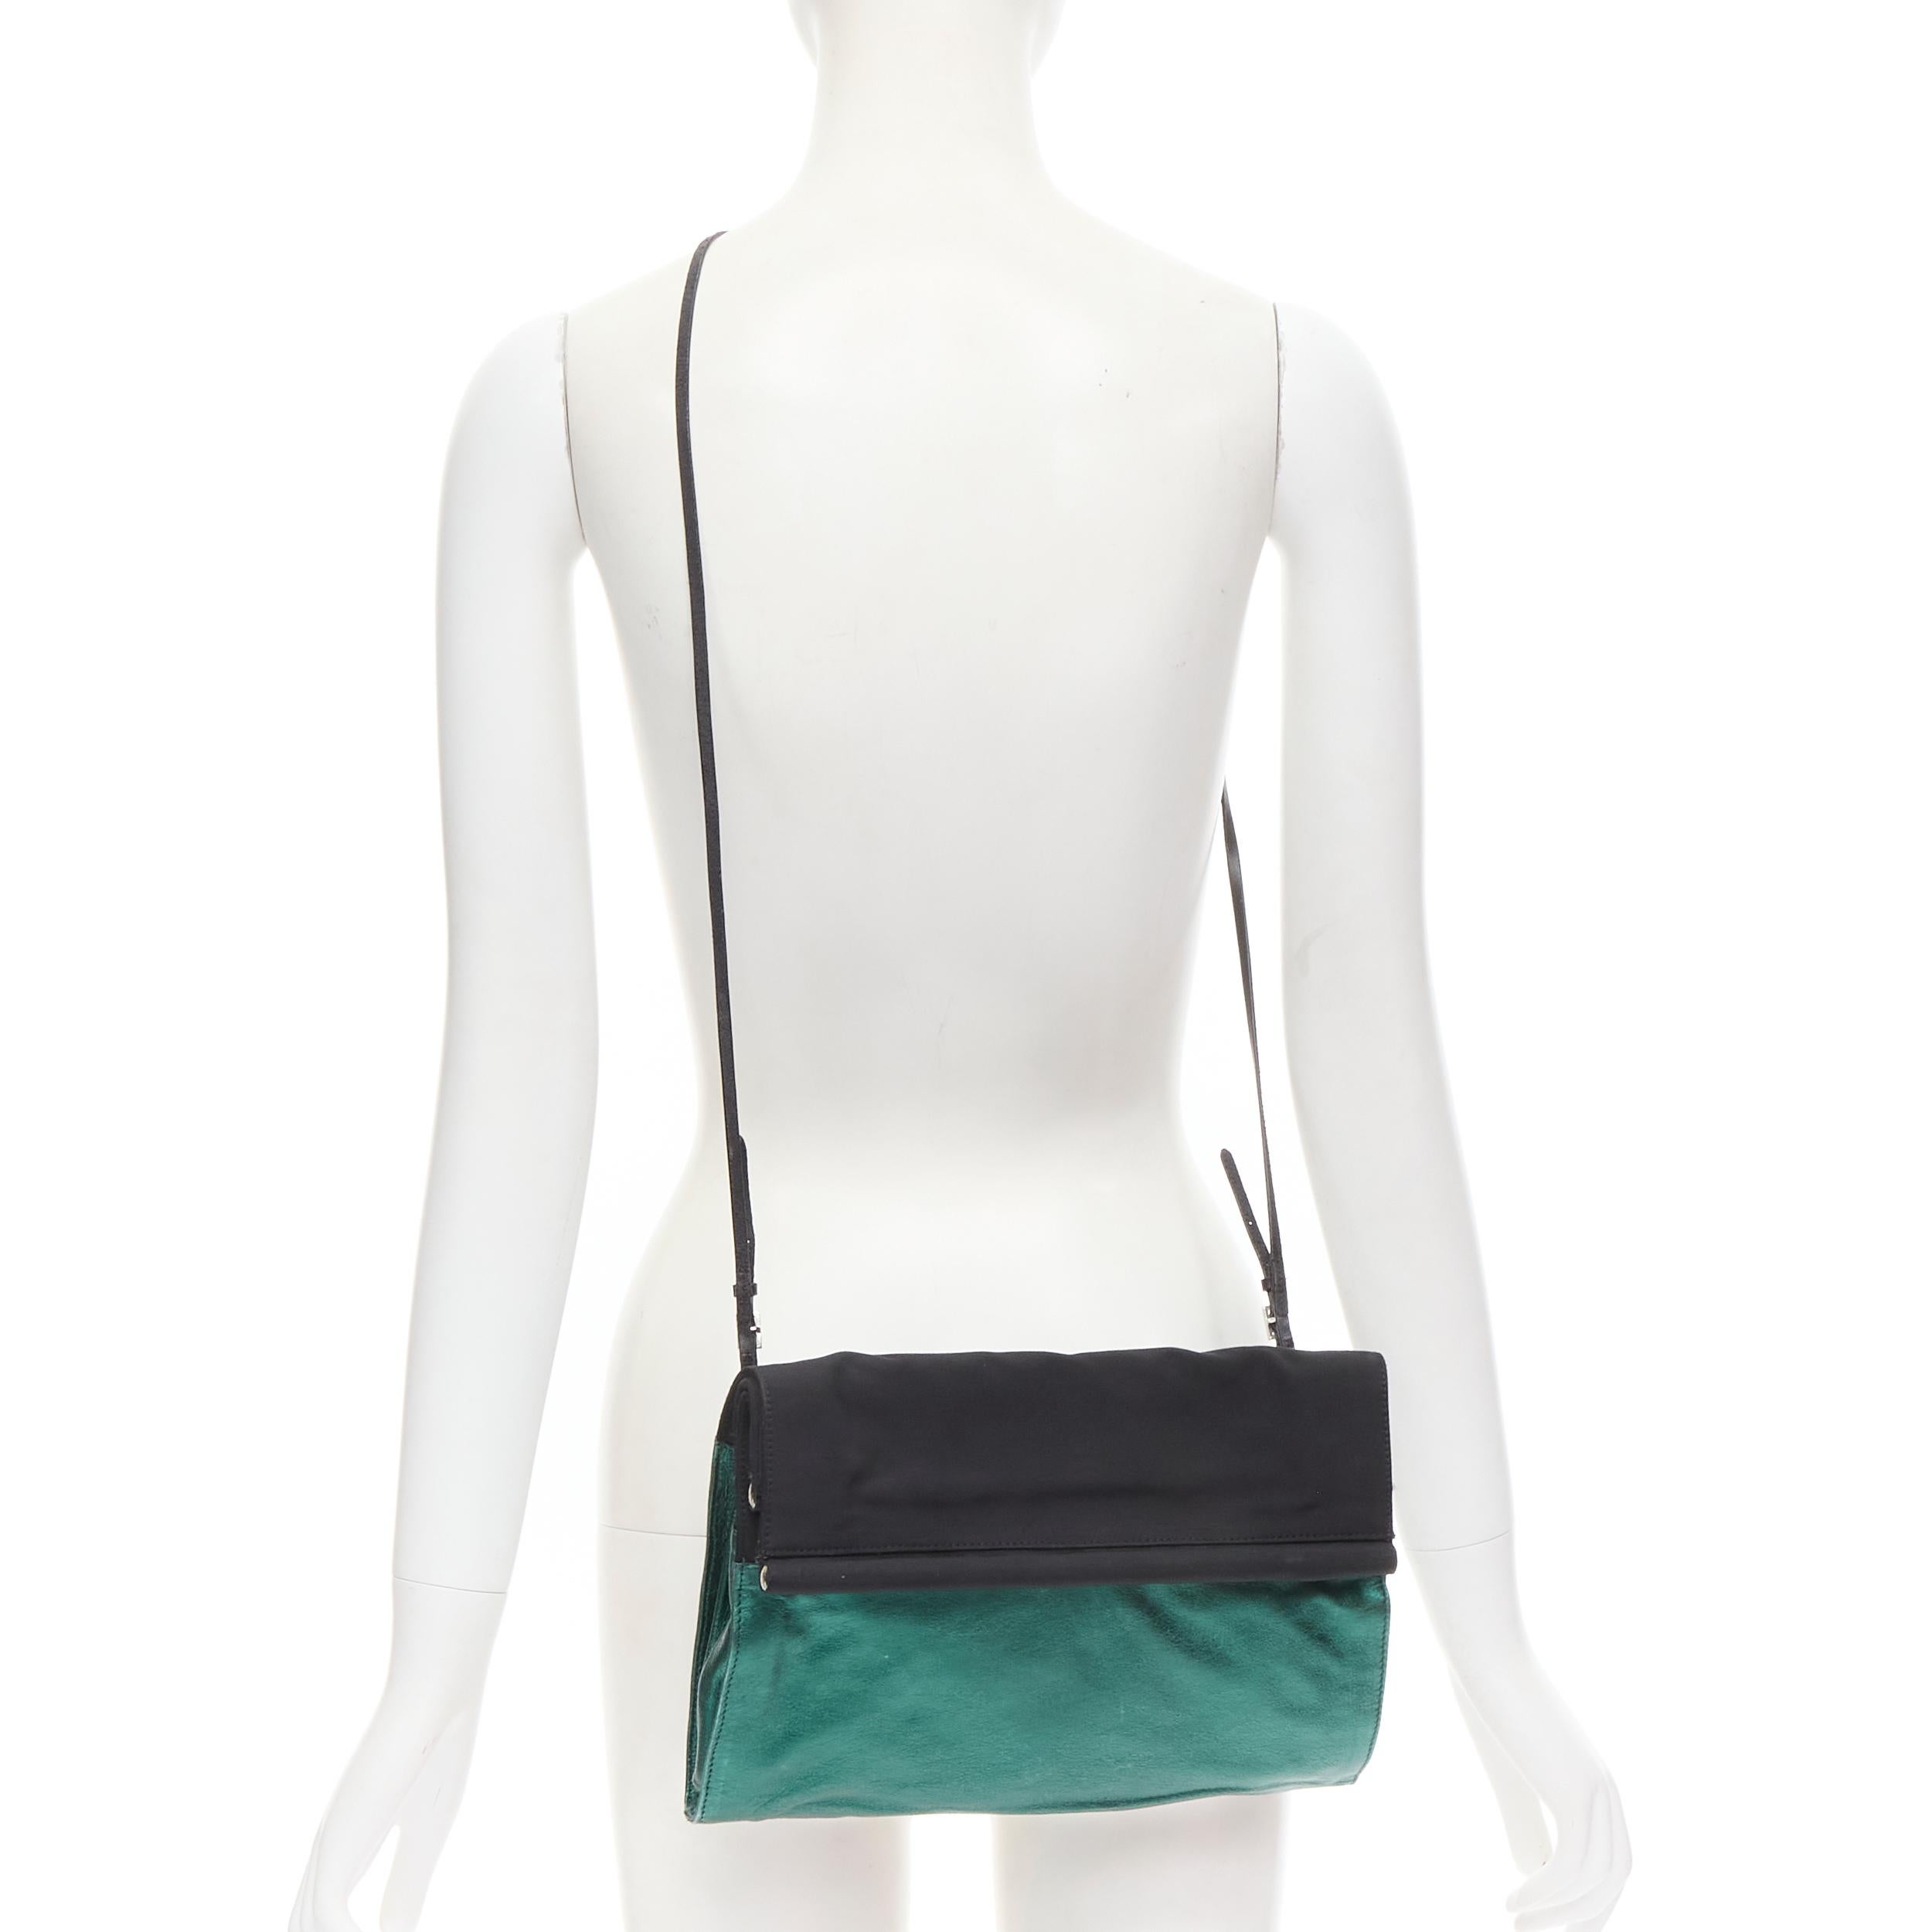 DRIES VAN NOTEN metallic green soft leather black foldover crossbody clutch bag 
Reference: CELG/A00044 
Brand: Dries Van Noten 
Designer: Dries Van Noten 
Model: Foldover crossbody clutch
Material: Leather 
Color: Green 
Pattern: Solid 
Closure: